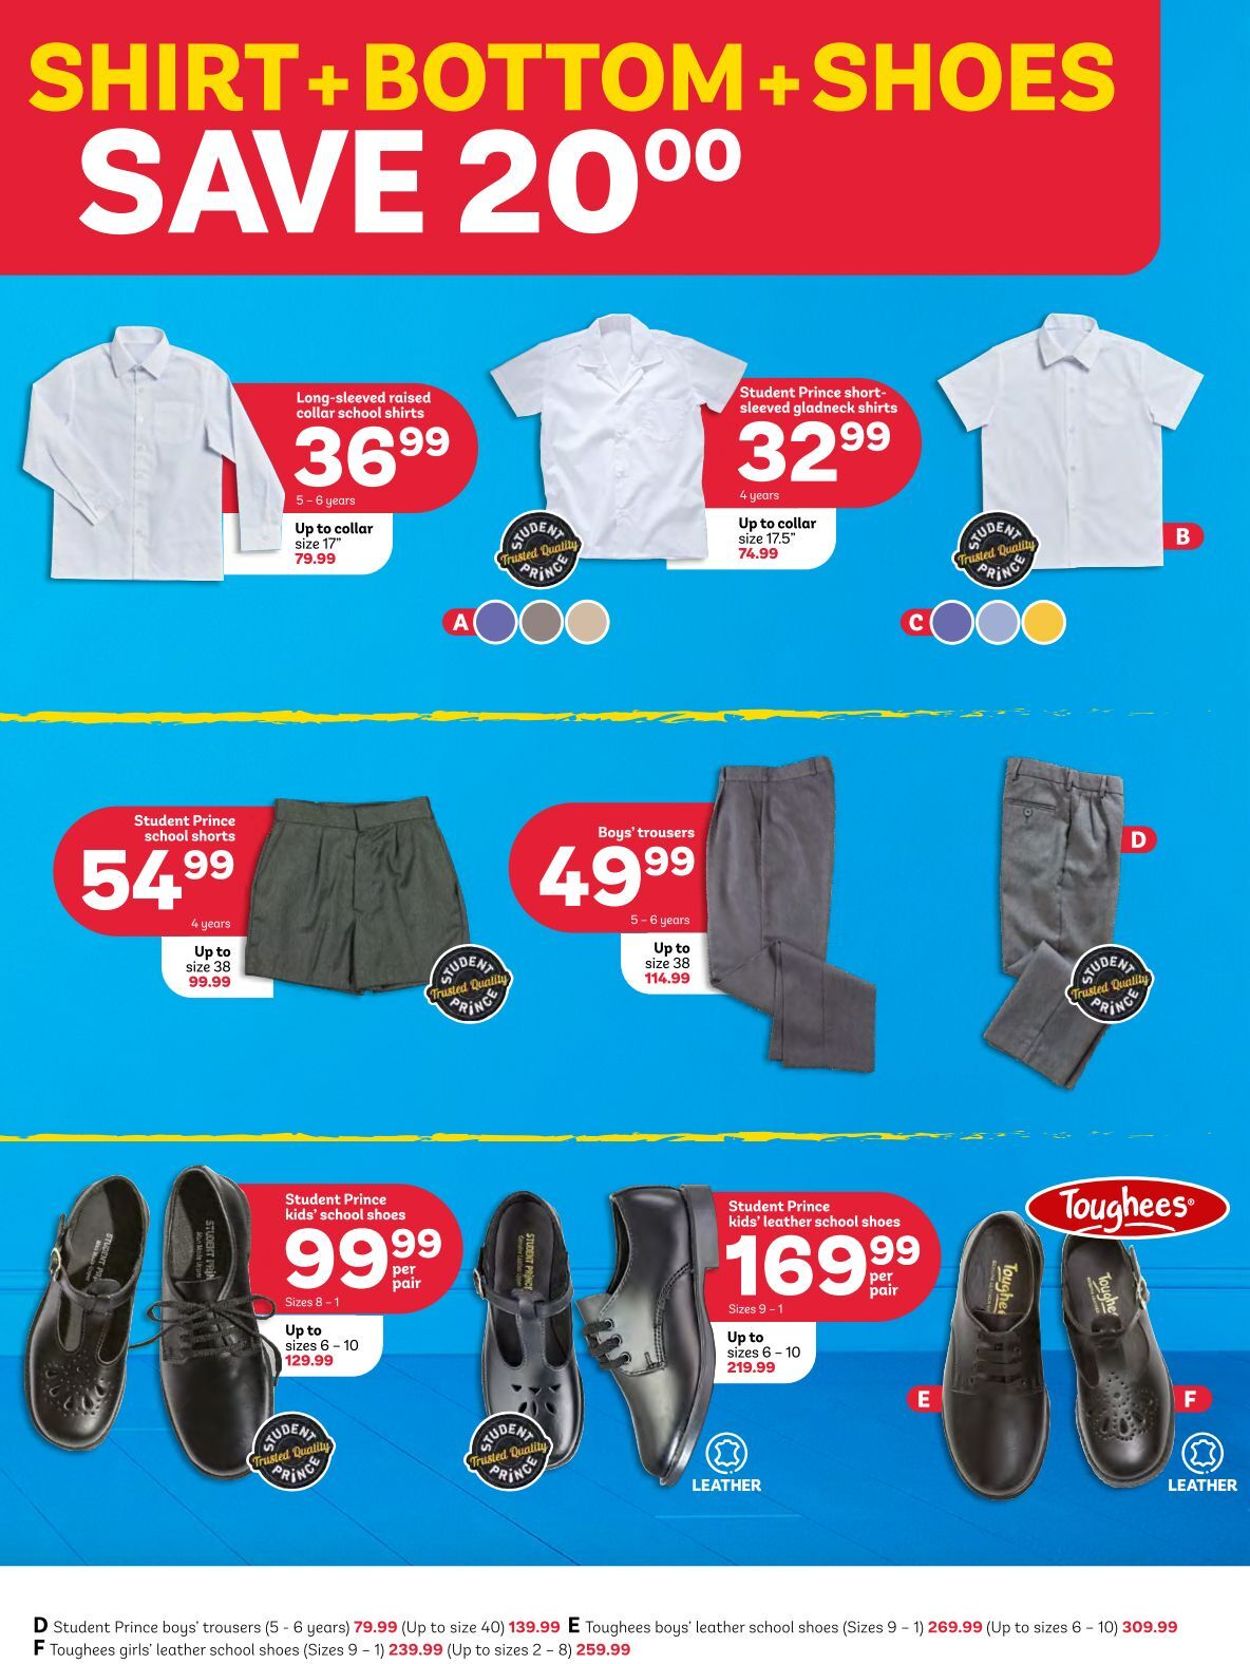 PEP Stores Current catalogue 2021/12/29 2022/01/27 [3]